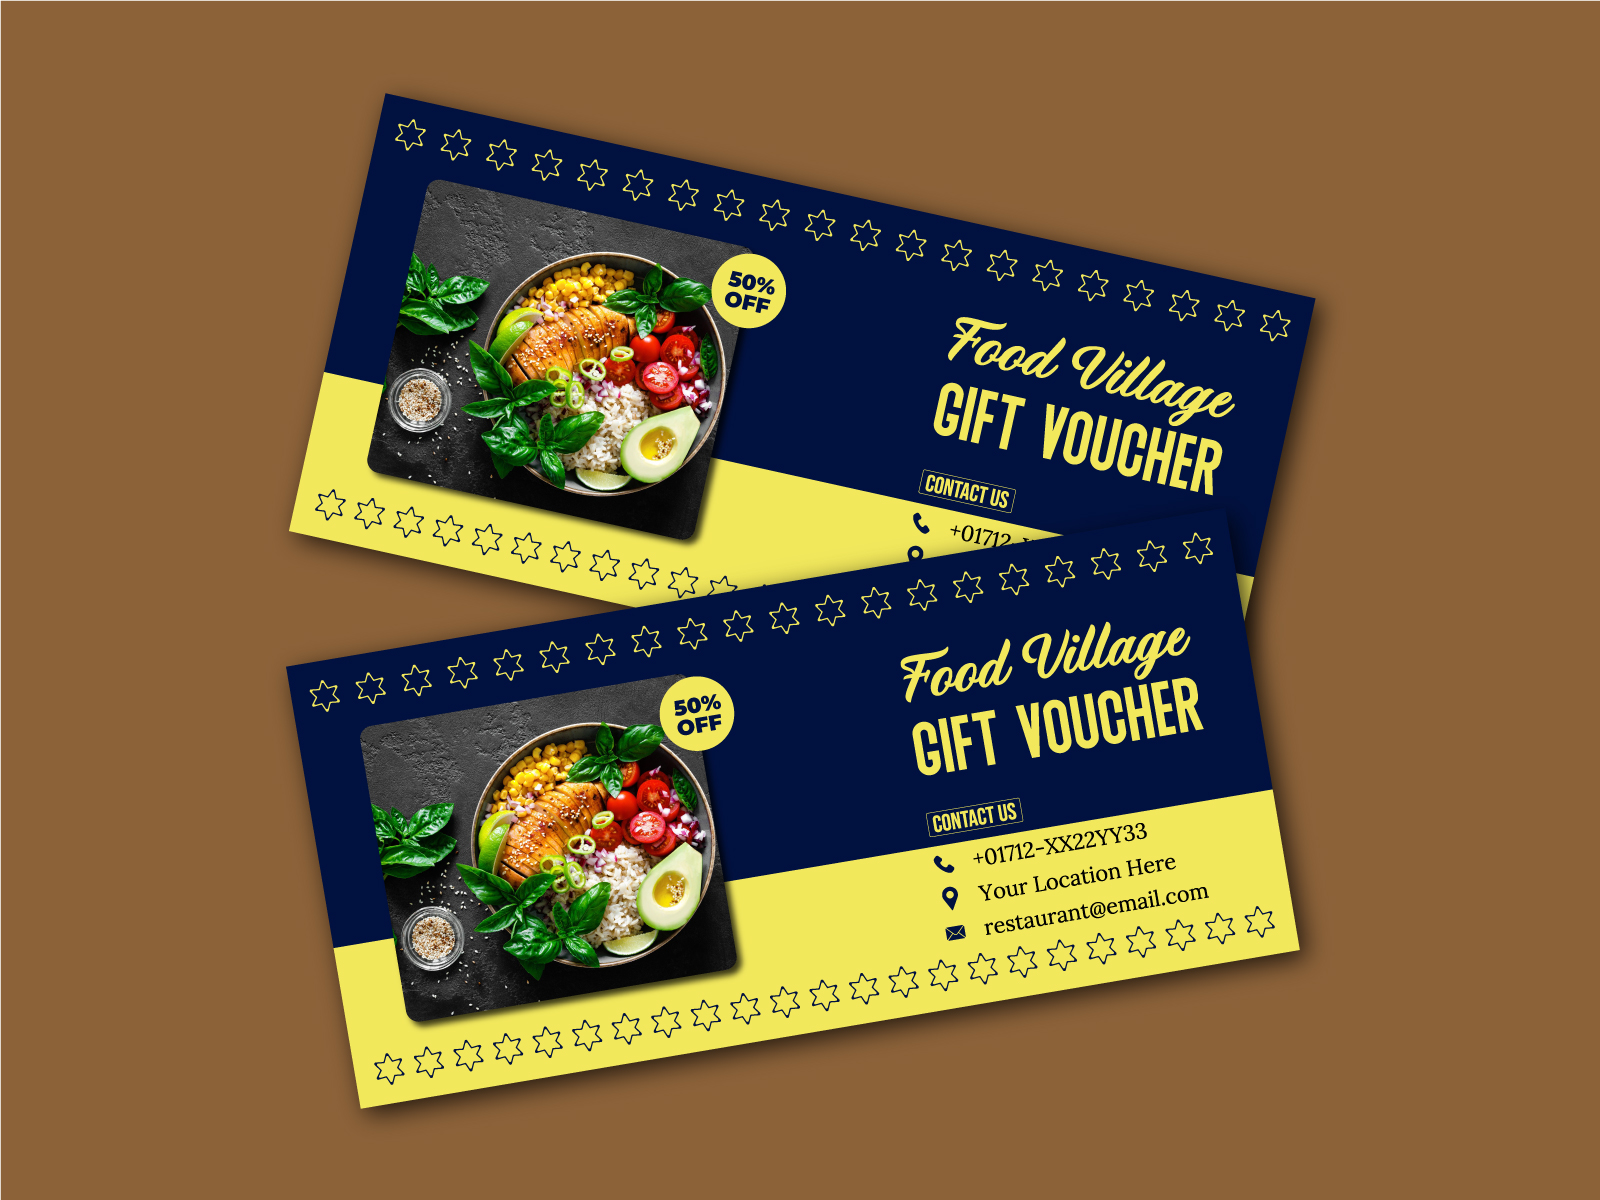 Free gift voucher templates to customize | PosterMyWall